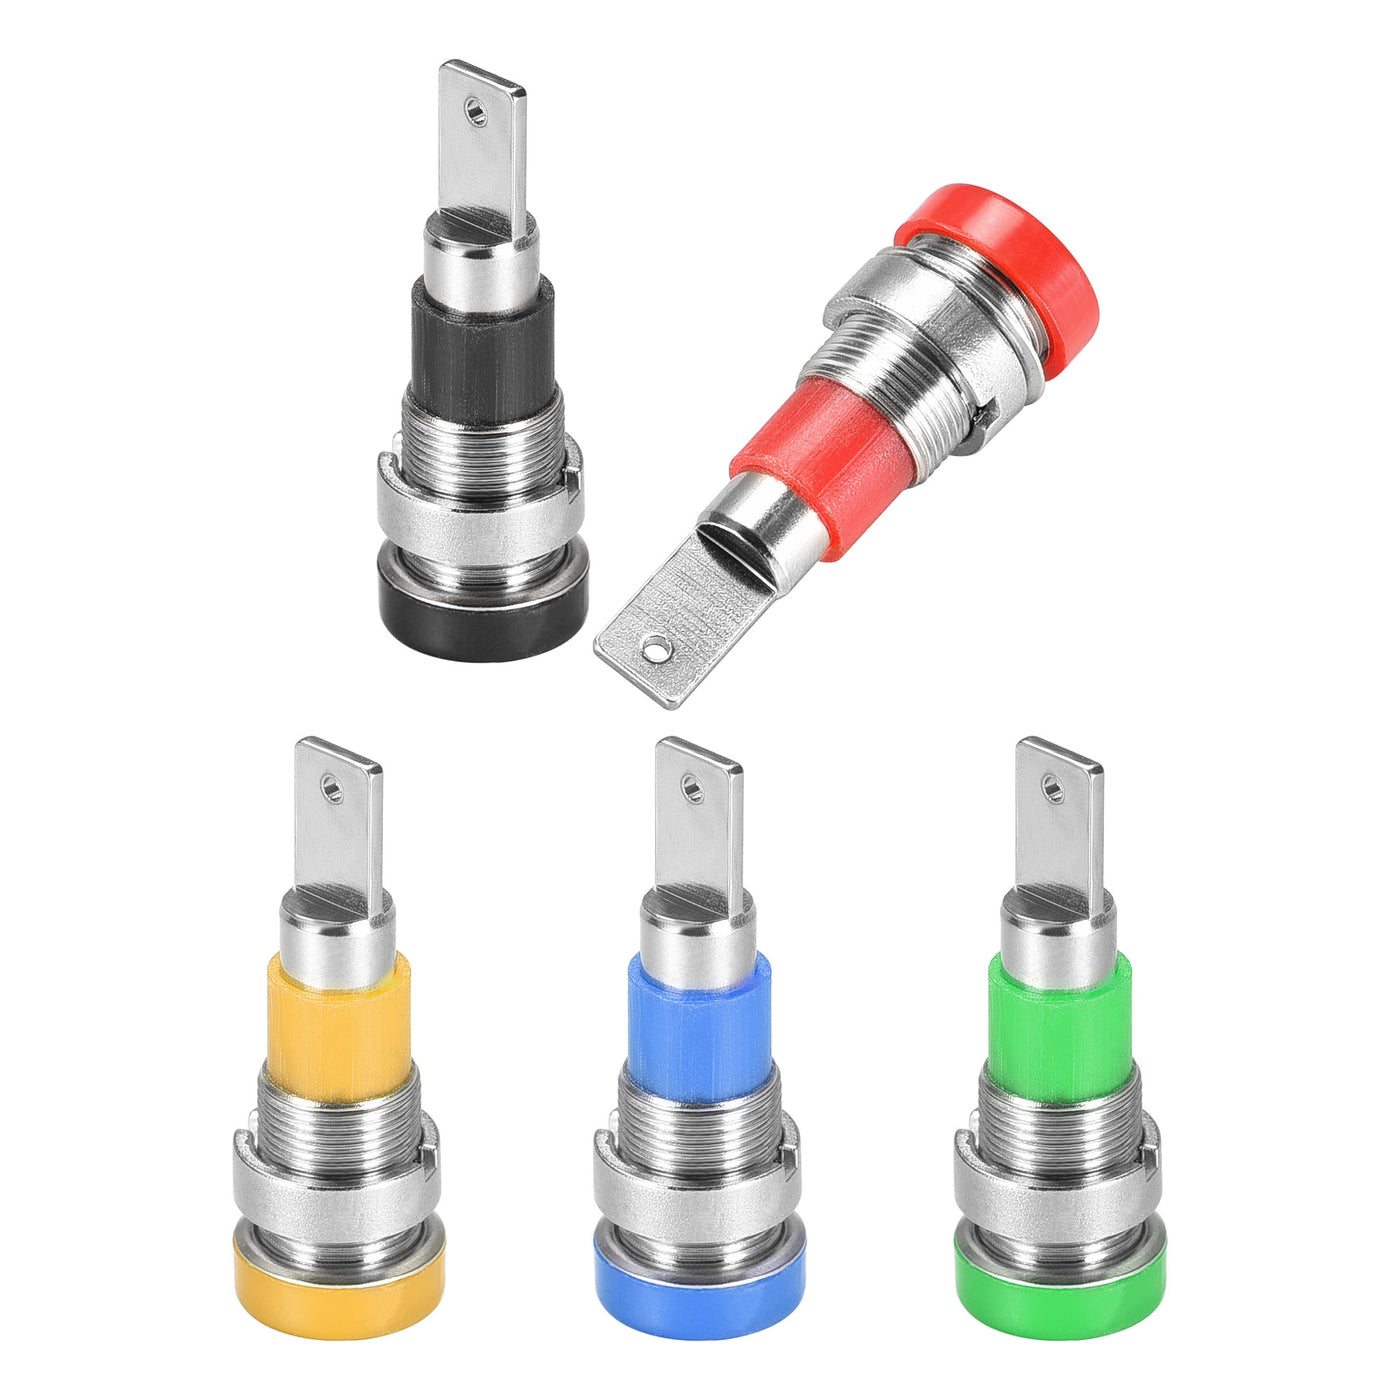 uxcell Uxcell 5 pcs 4mm Banana Jack Binding Post Female Socket Plug Terminal Connector for Loudspeaker Amplifier Red Black Yellow Blue Green